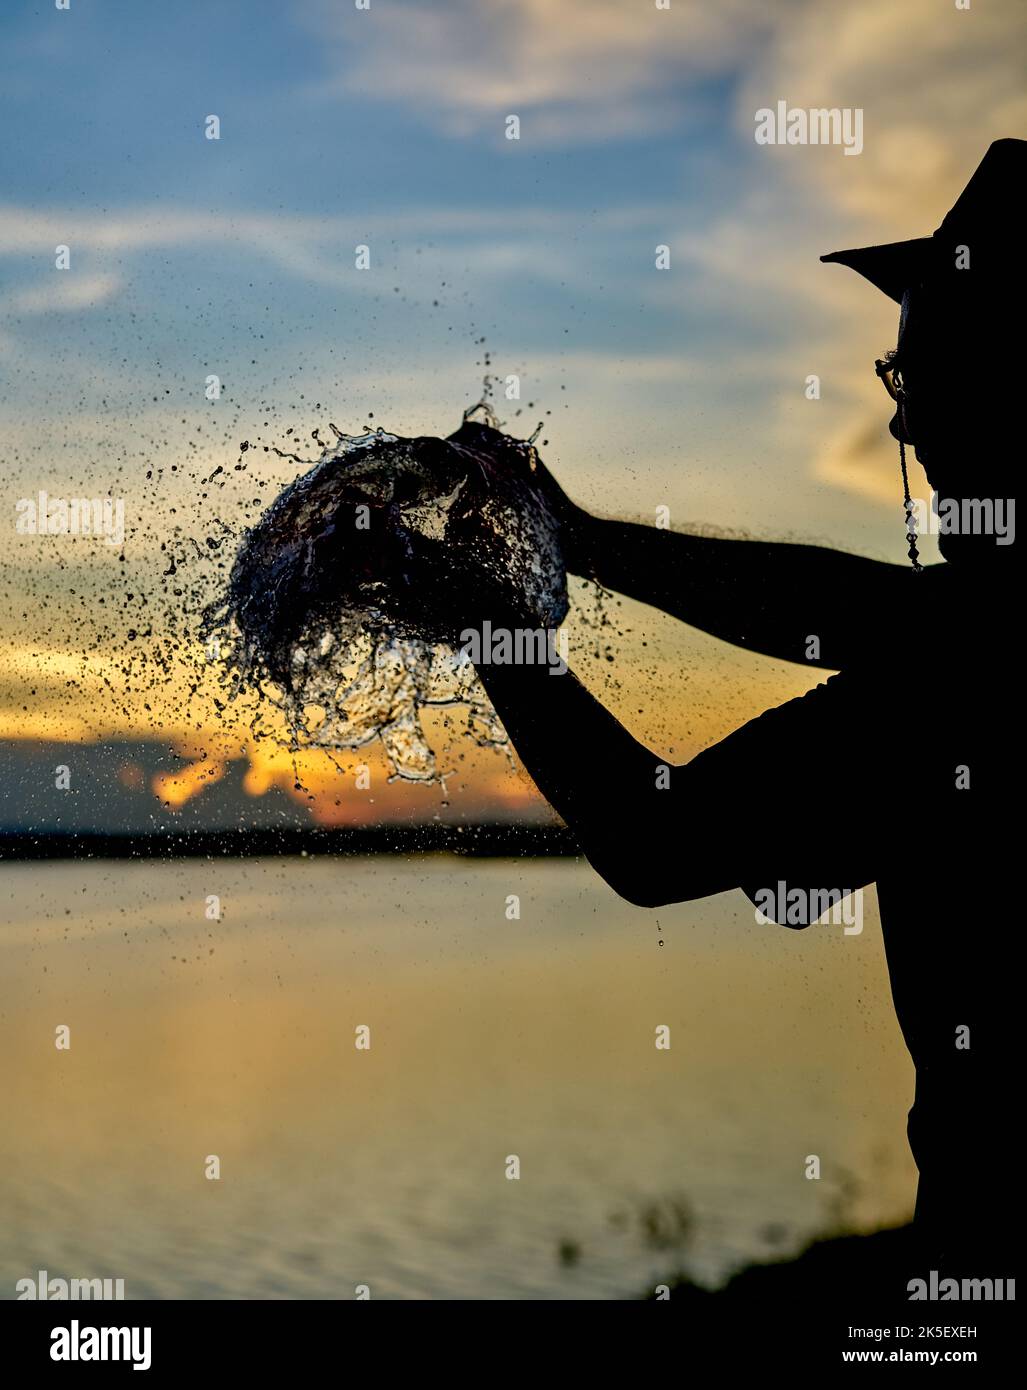 A water balloon bursting against a sunset sky. Stock Photo